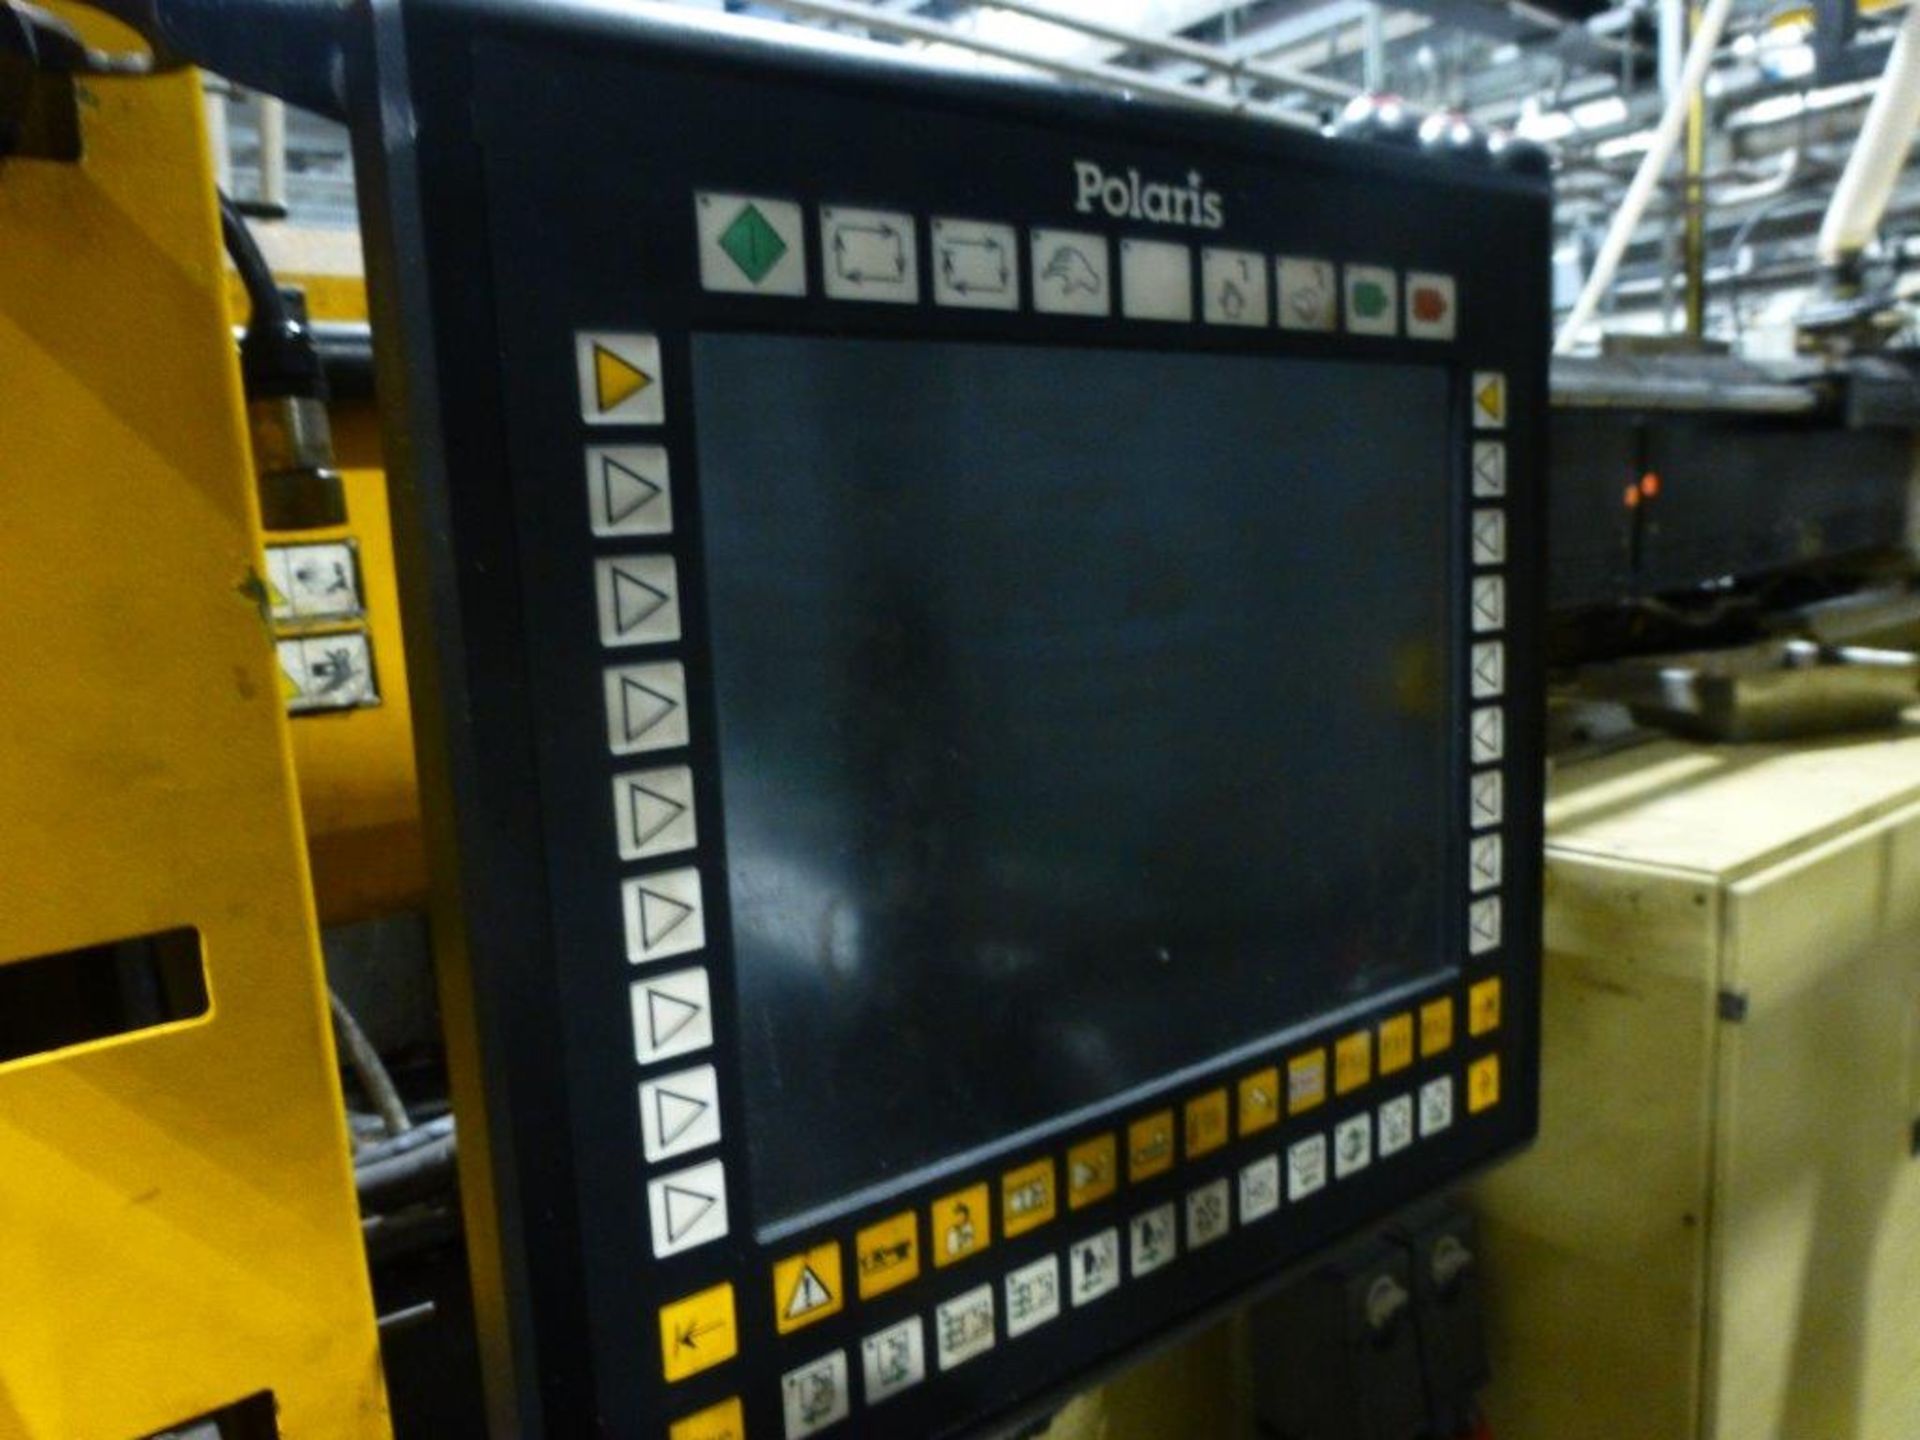 Husky H400 RS115 100 CNC plastic injection moulding machine Serial No. 2640104 (2003) with 400 tonne - Image 4 of 5